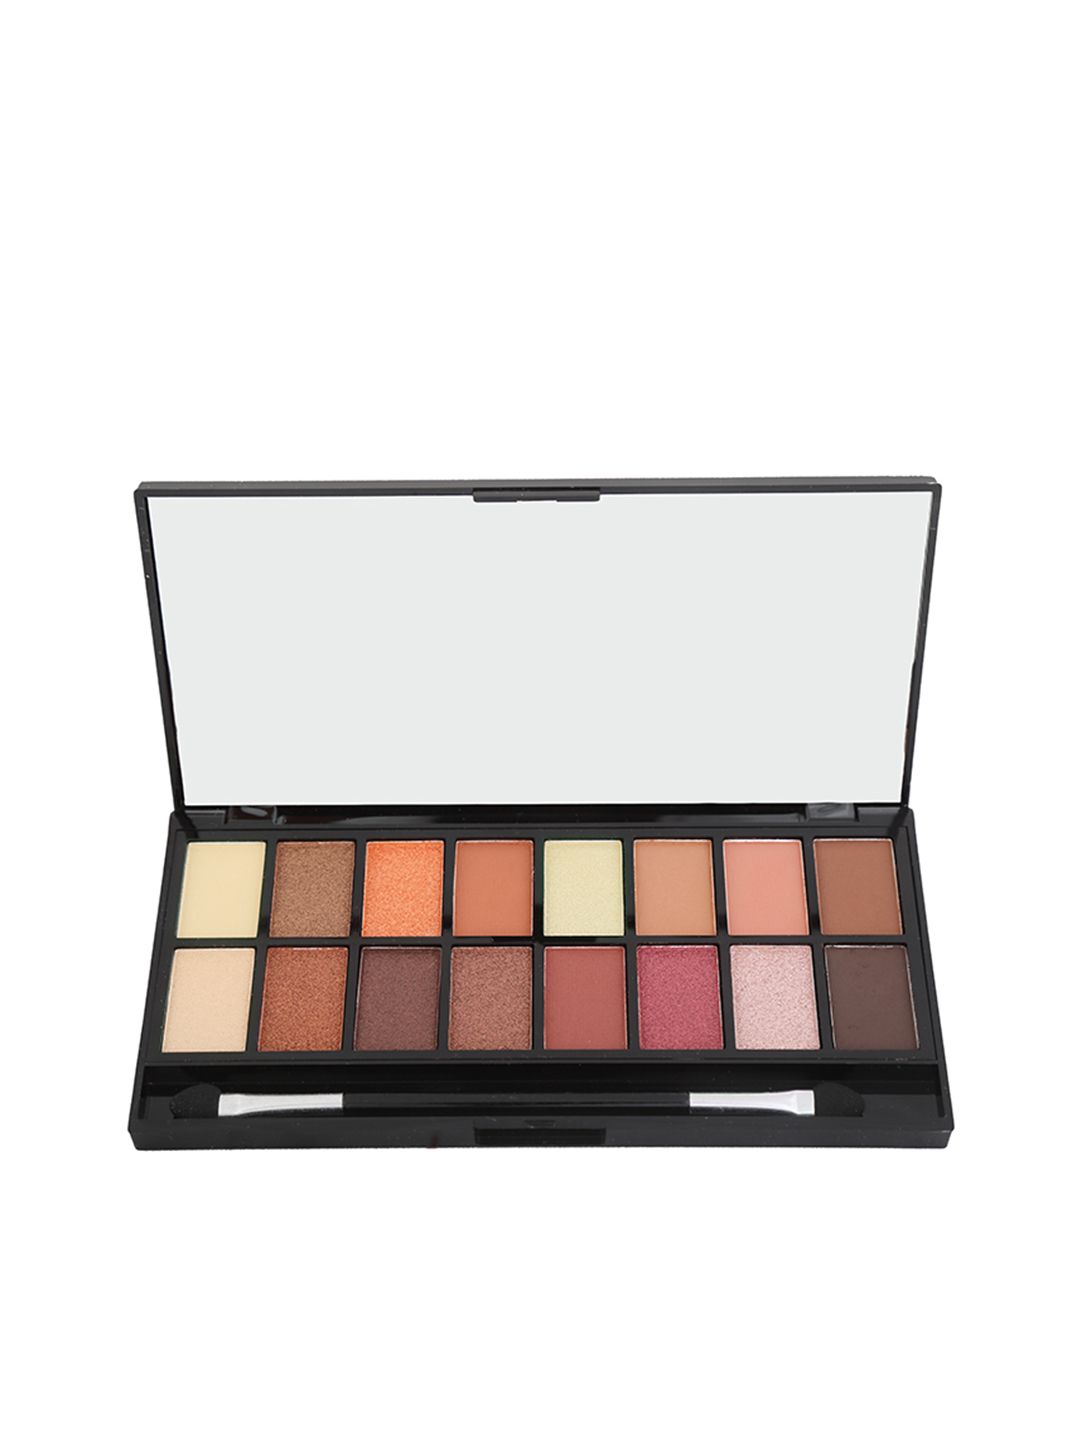 Miss Claire 3 Ultra Glow Eyeshadow Palette 16 g Price in India